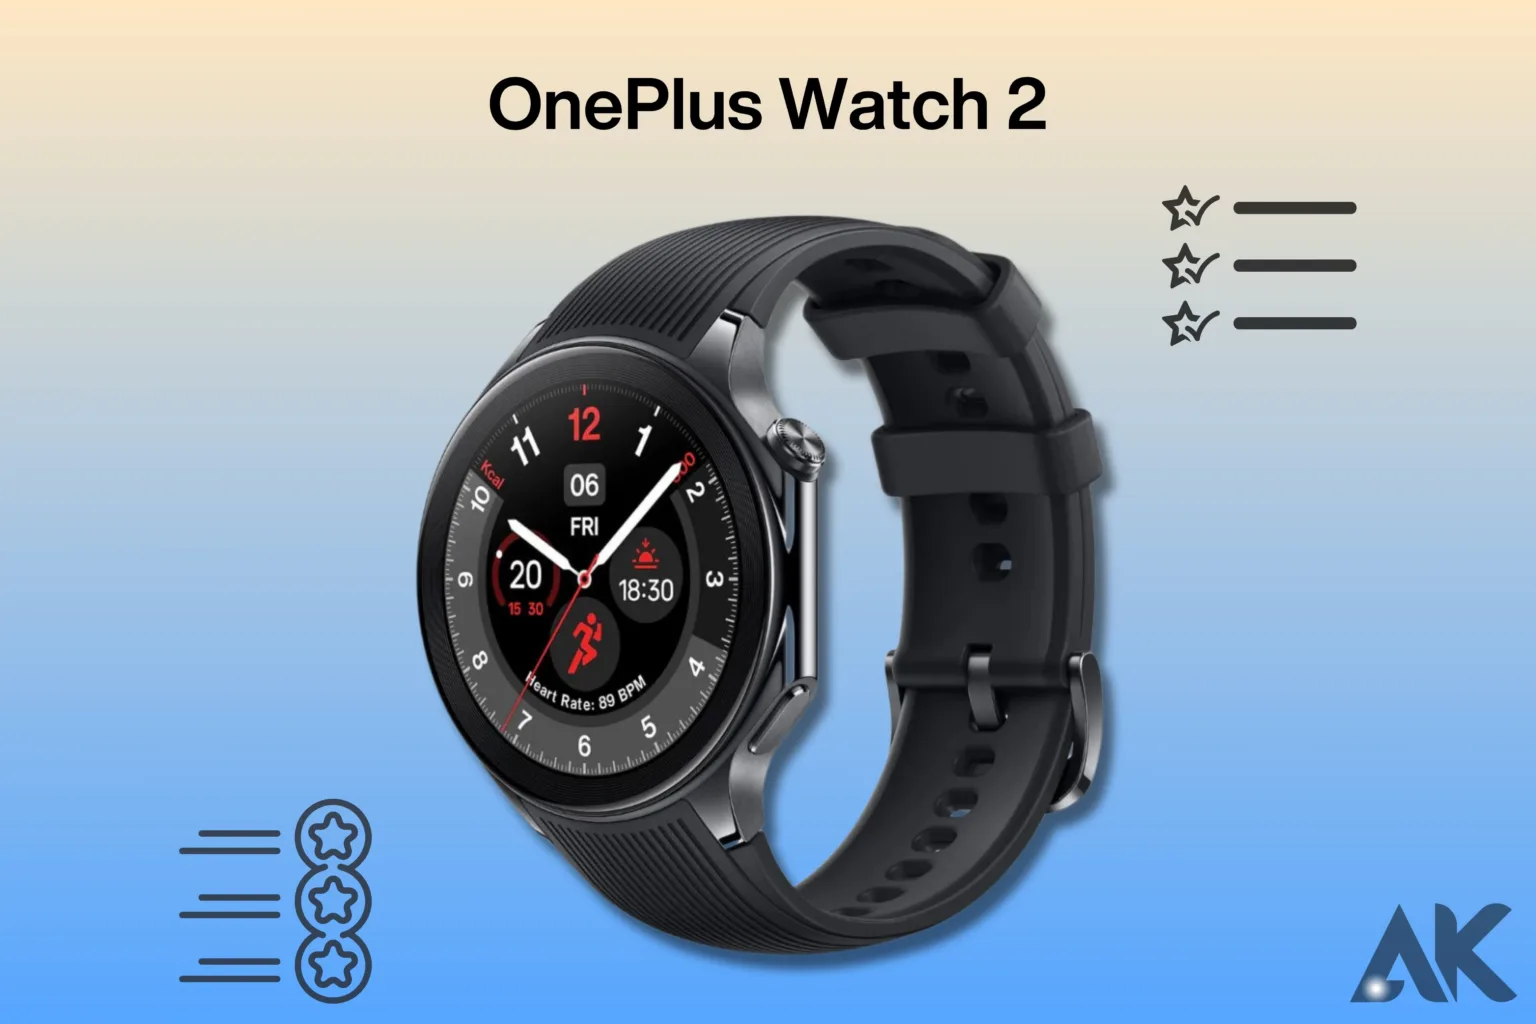 OnePlus Watch 2 features